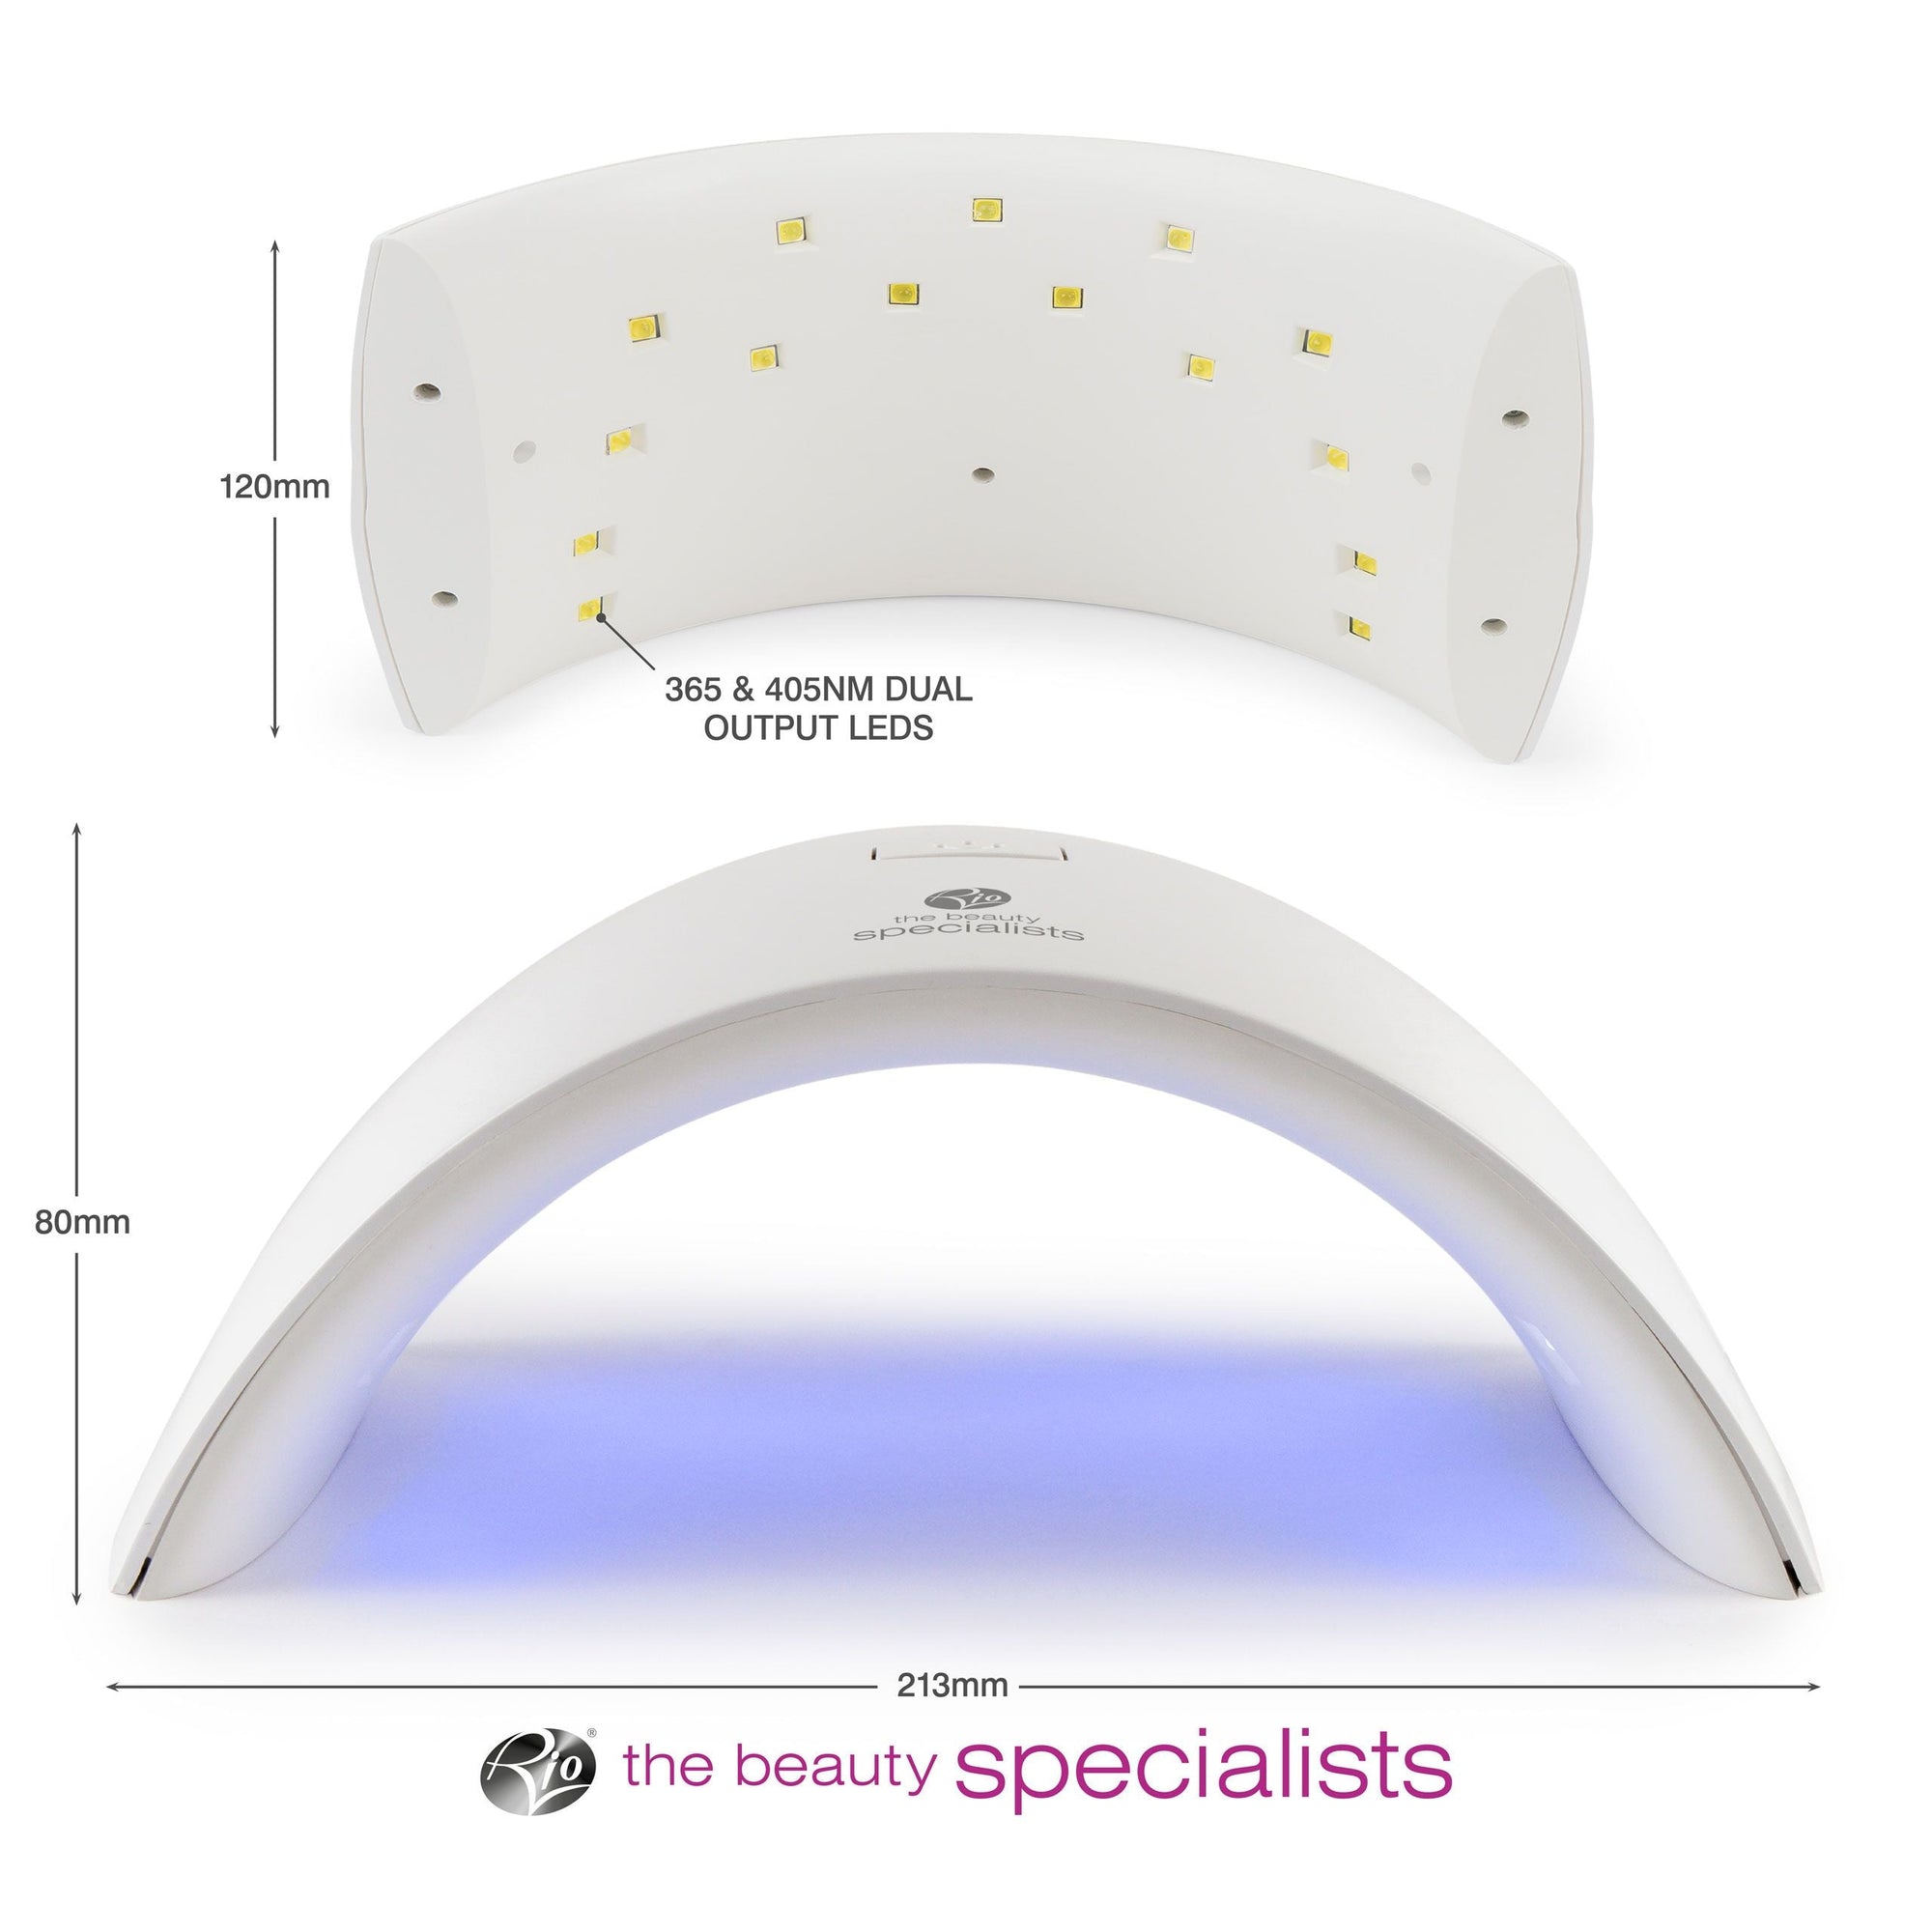 underneath of Salon Pro UV & LED Lamp showing the uv & led lights labelled 365 & 405nm dual output LEDs and arrow labelling width 120mm of the lamp with below image labelled with arrows for height 80mm and width 213mm